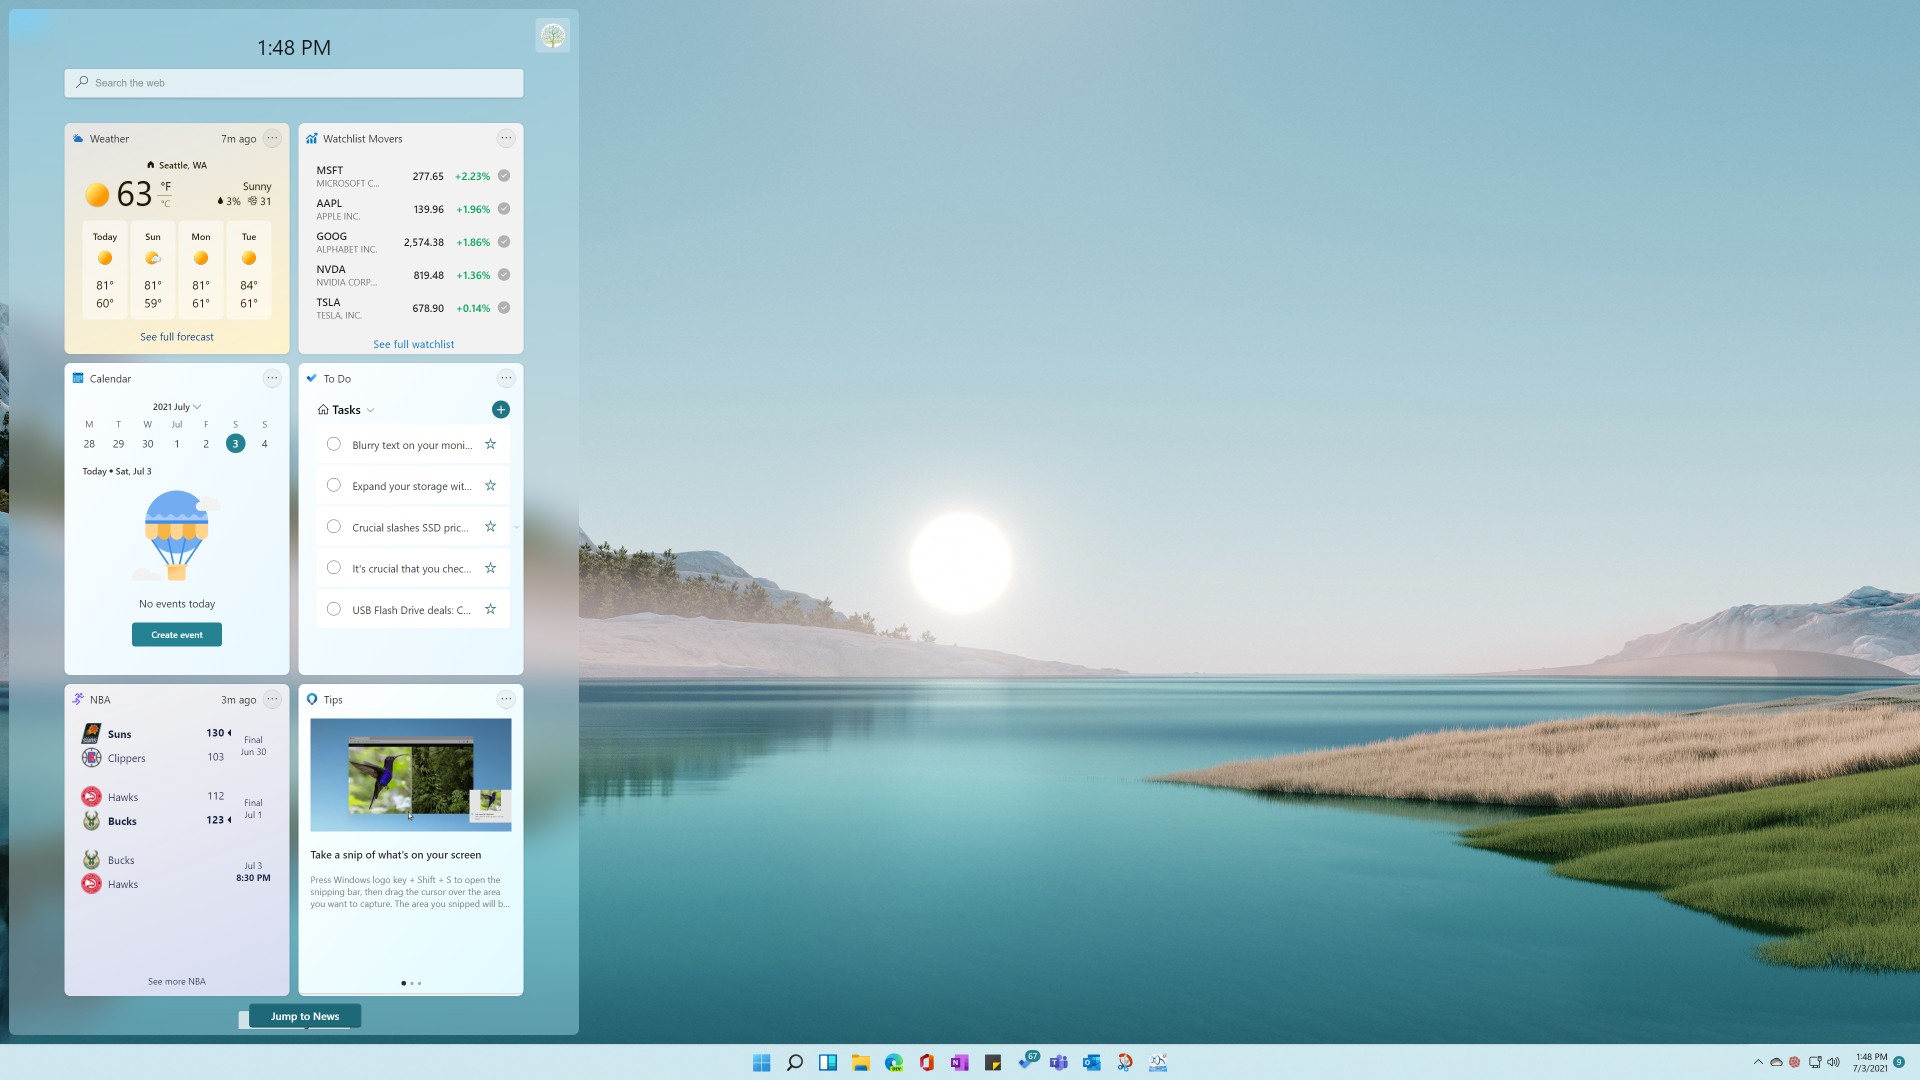 Want more Windows themes? Check out the Microsoft Store